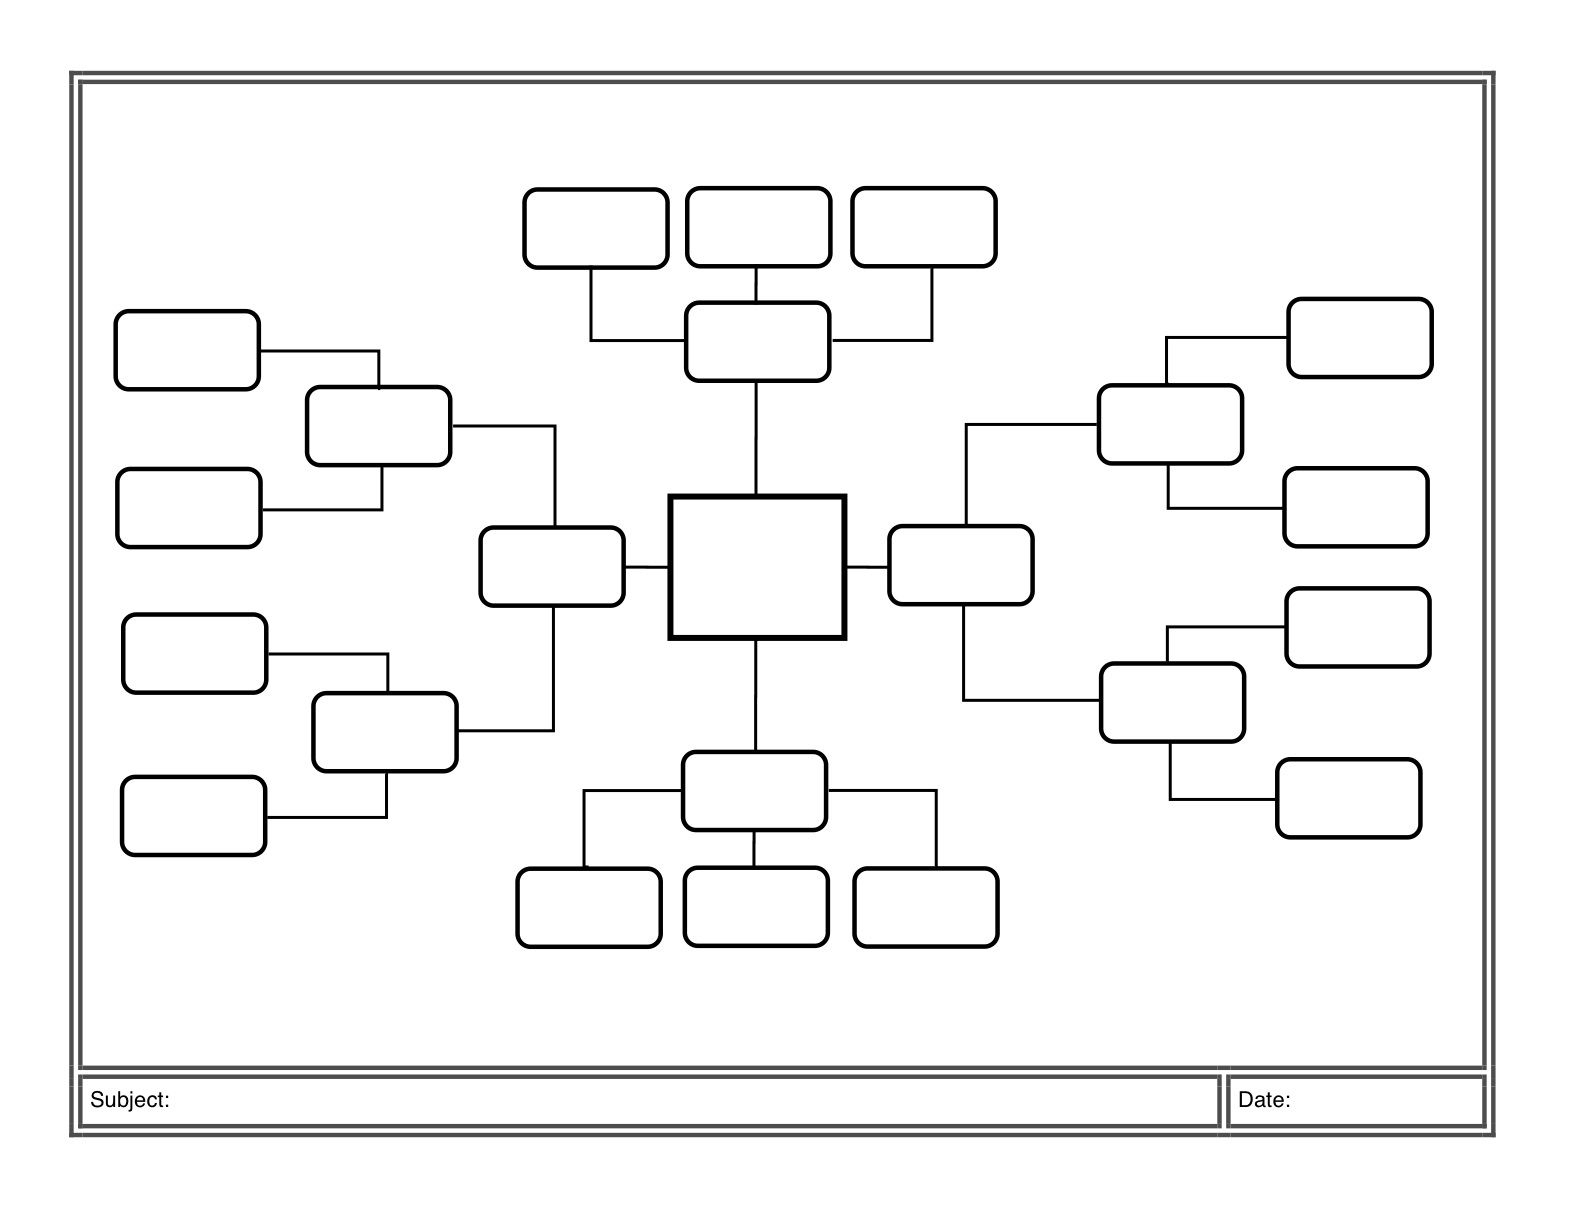 Mind Map Templete In Black And White: Main Item, Secondary Items - Printable Mind Maps For Students